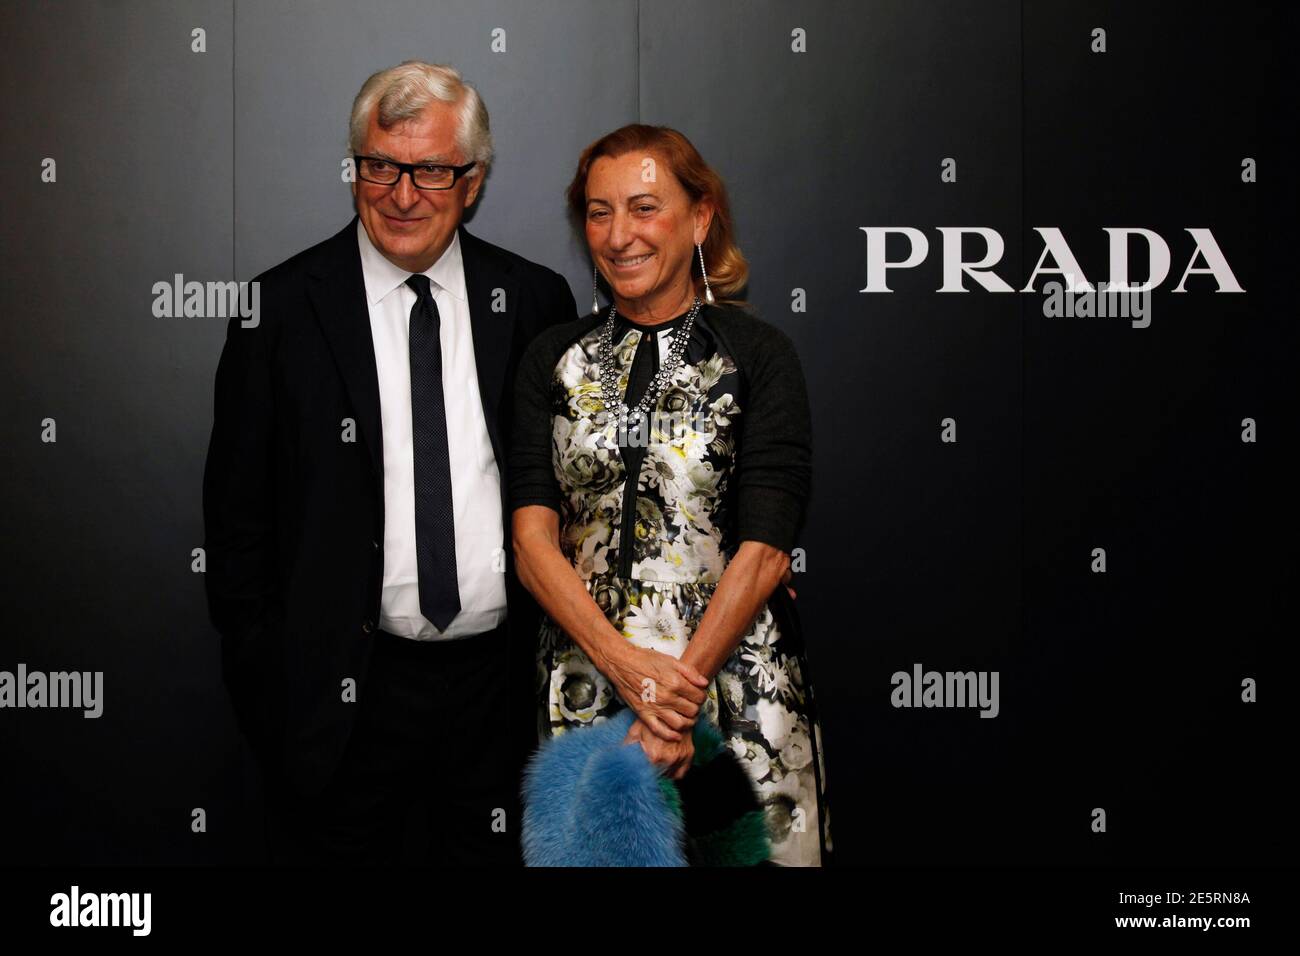 Prada's Chief Executive Patrizio Bertelli (L) poses with his wife, fashion  designer Miuccia Prada, after attending a fashion show as part of an  investors launching presentation ahead of Prada's IPO in Hong